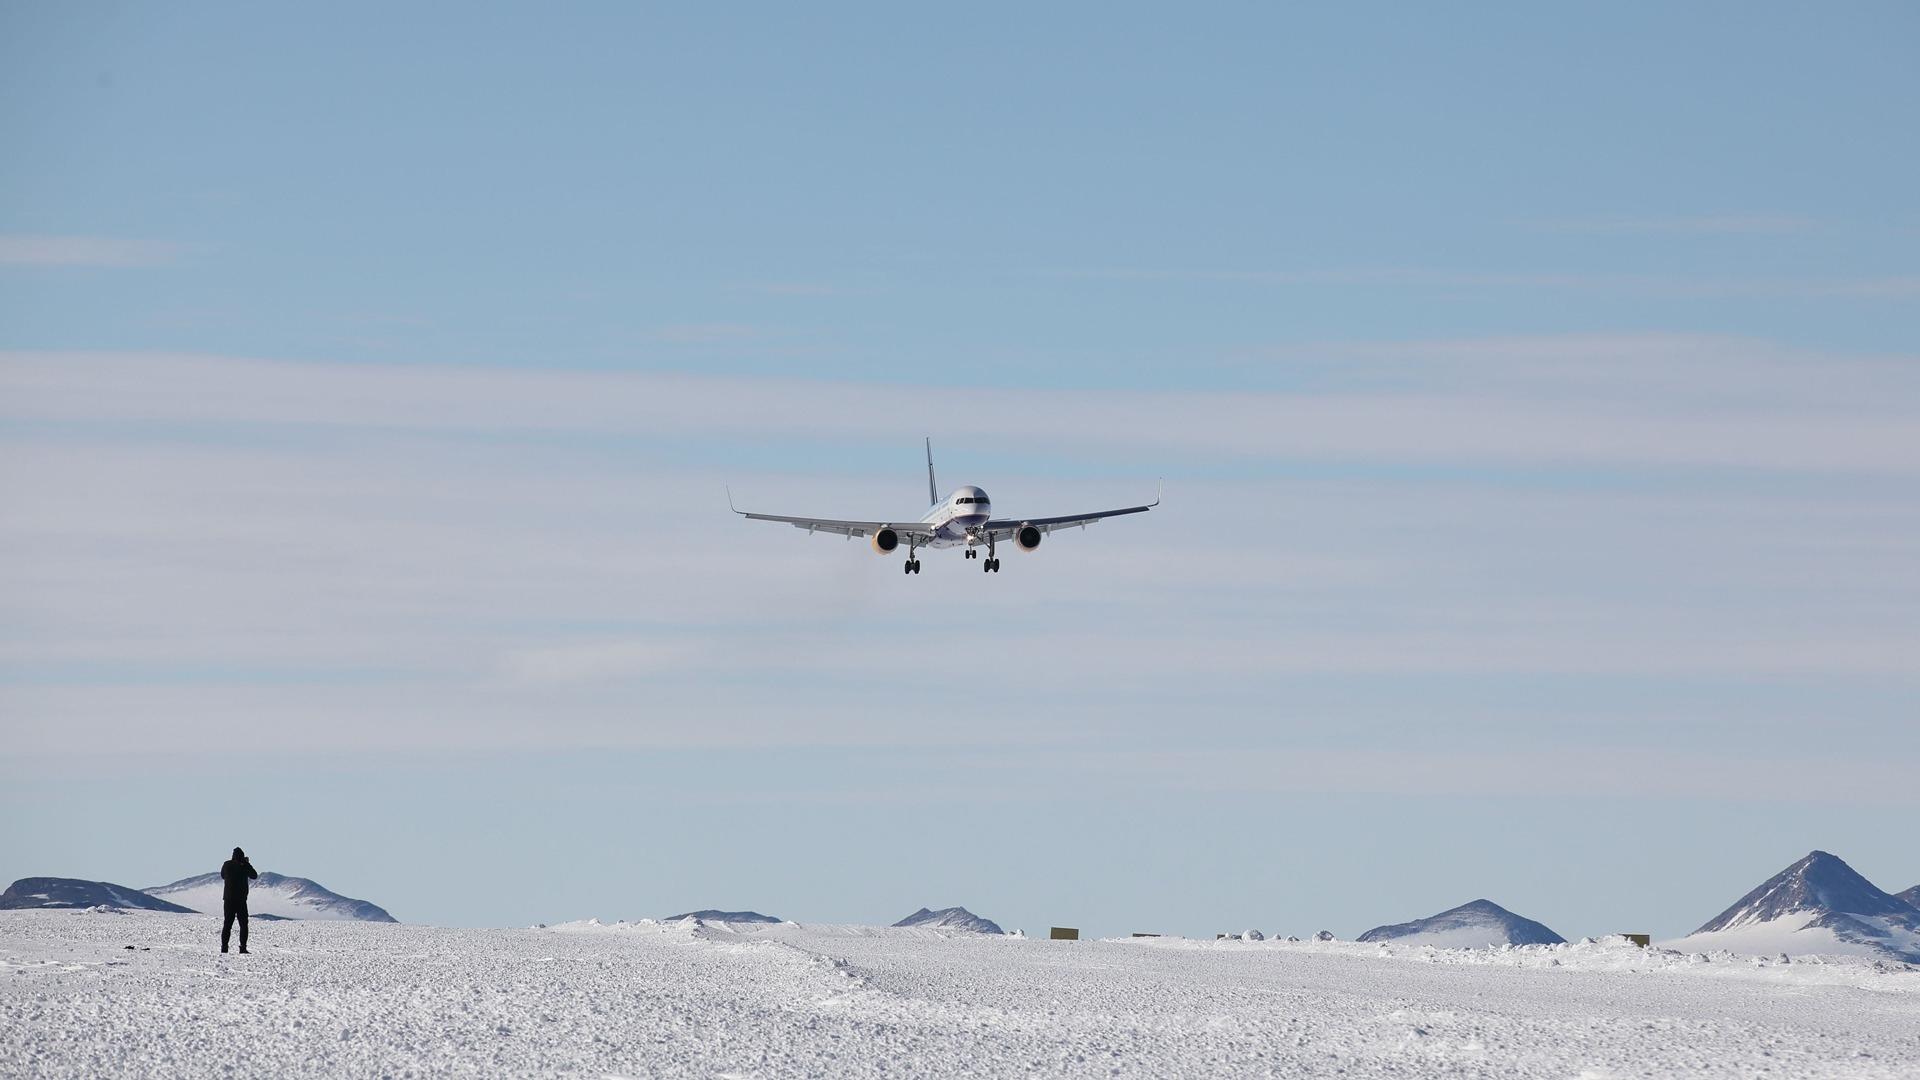 First Boeing 757 Airliner Landing On Blue Ice Runway In Antarctica. The